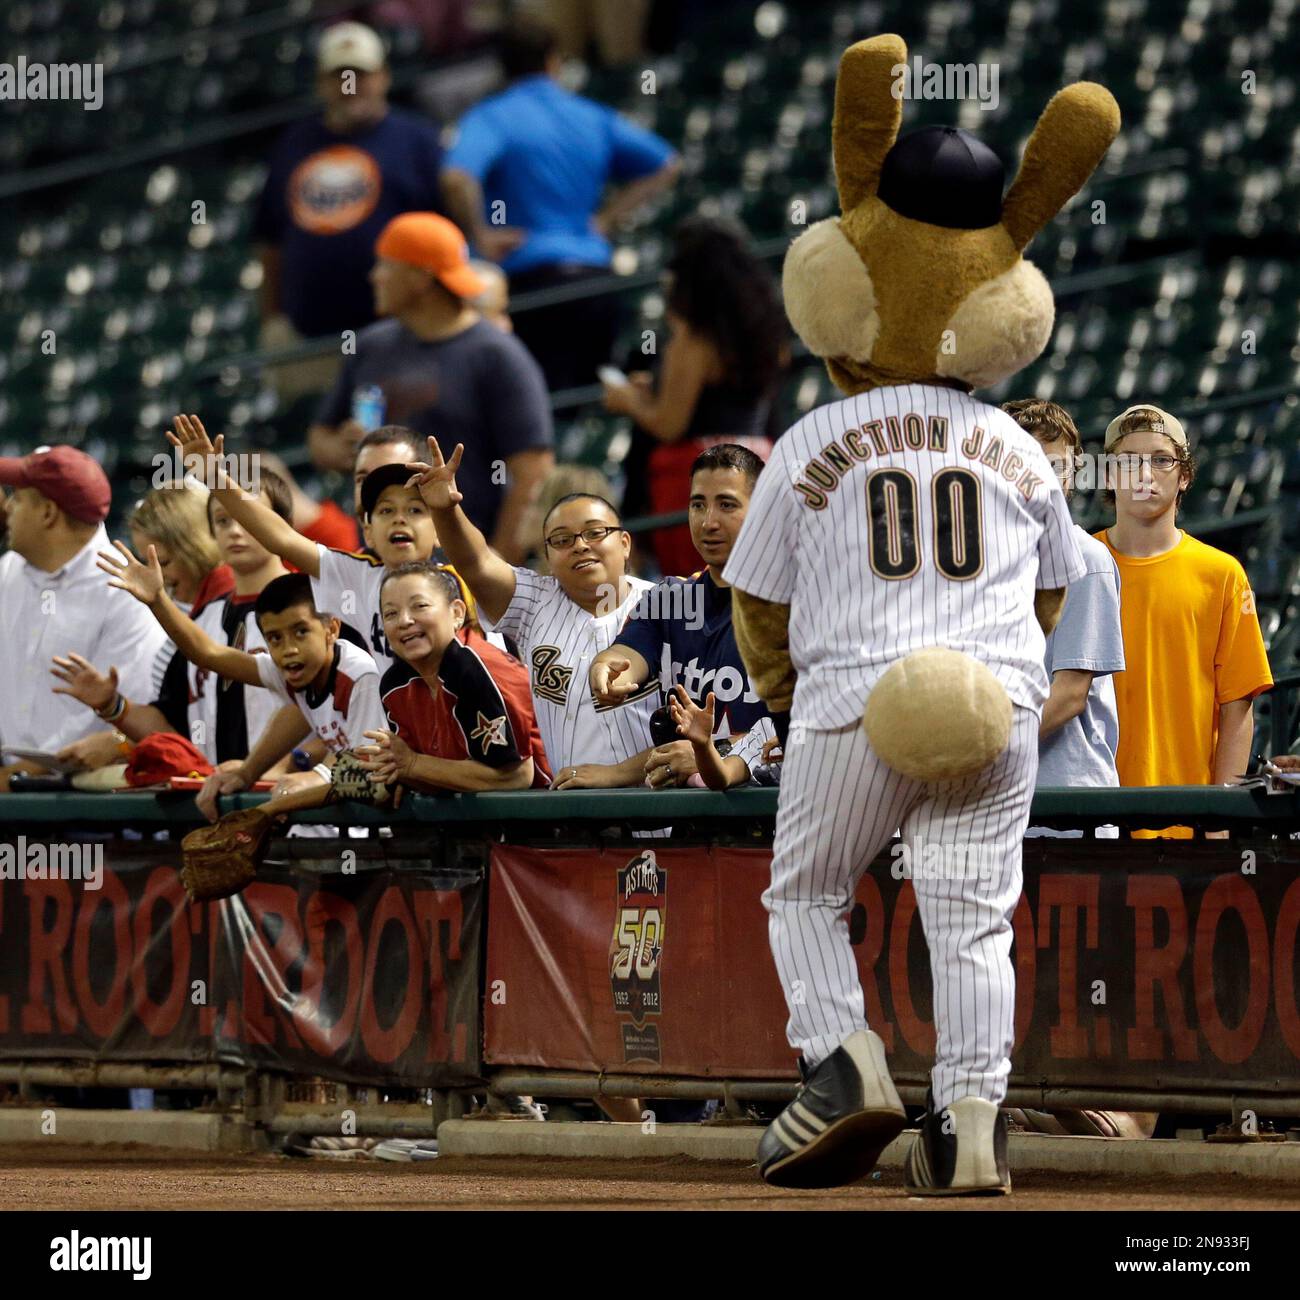 Houston Astros mascot Junction Jack looks on prior to an MLB baseball game  against the Chicago Cubs at Minute Maid Park on Monday April 11, 2011 in  Houston, Texas. Chicago won 5-4. (